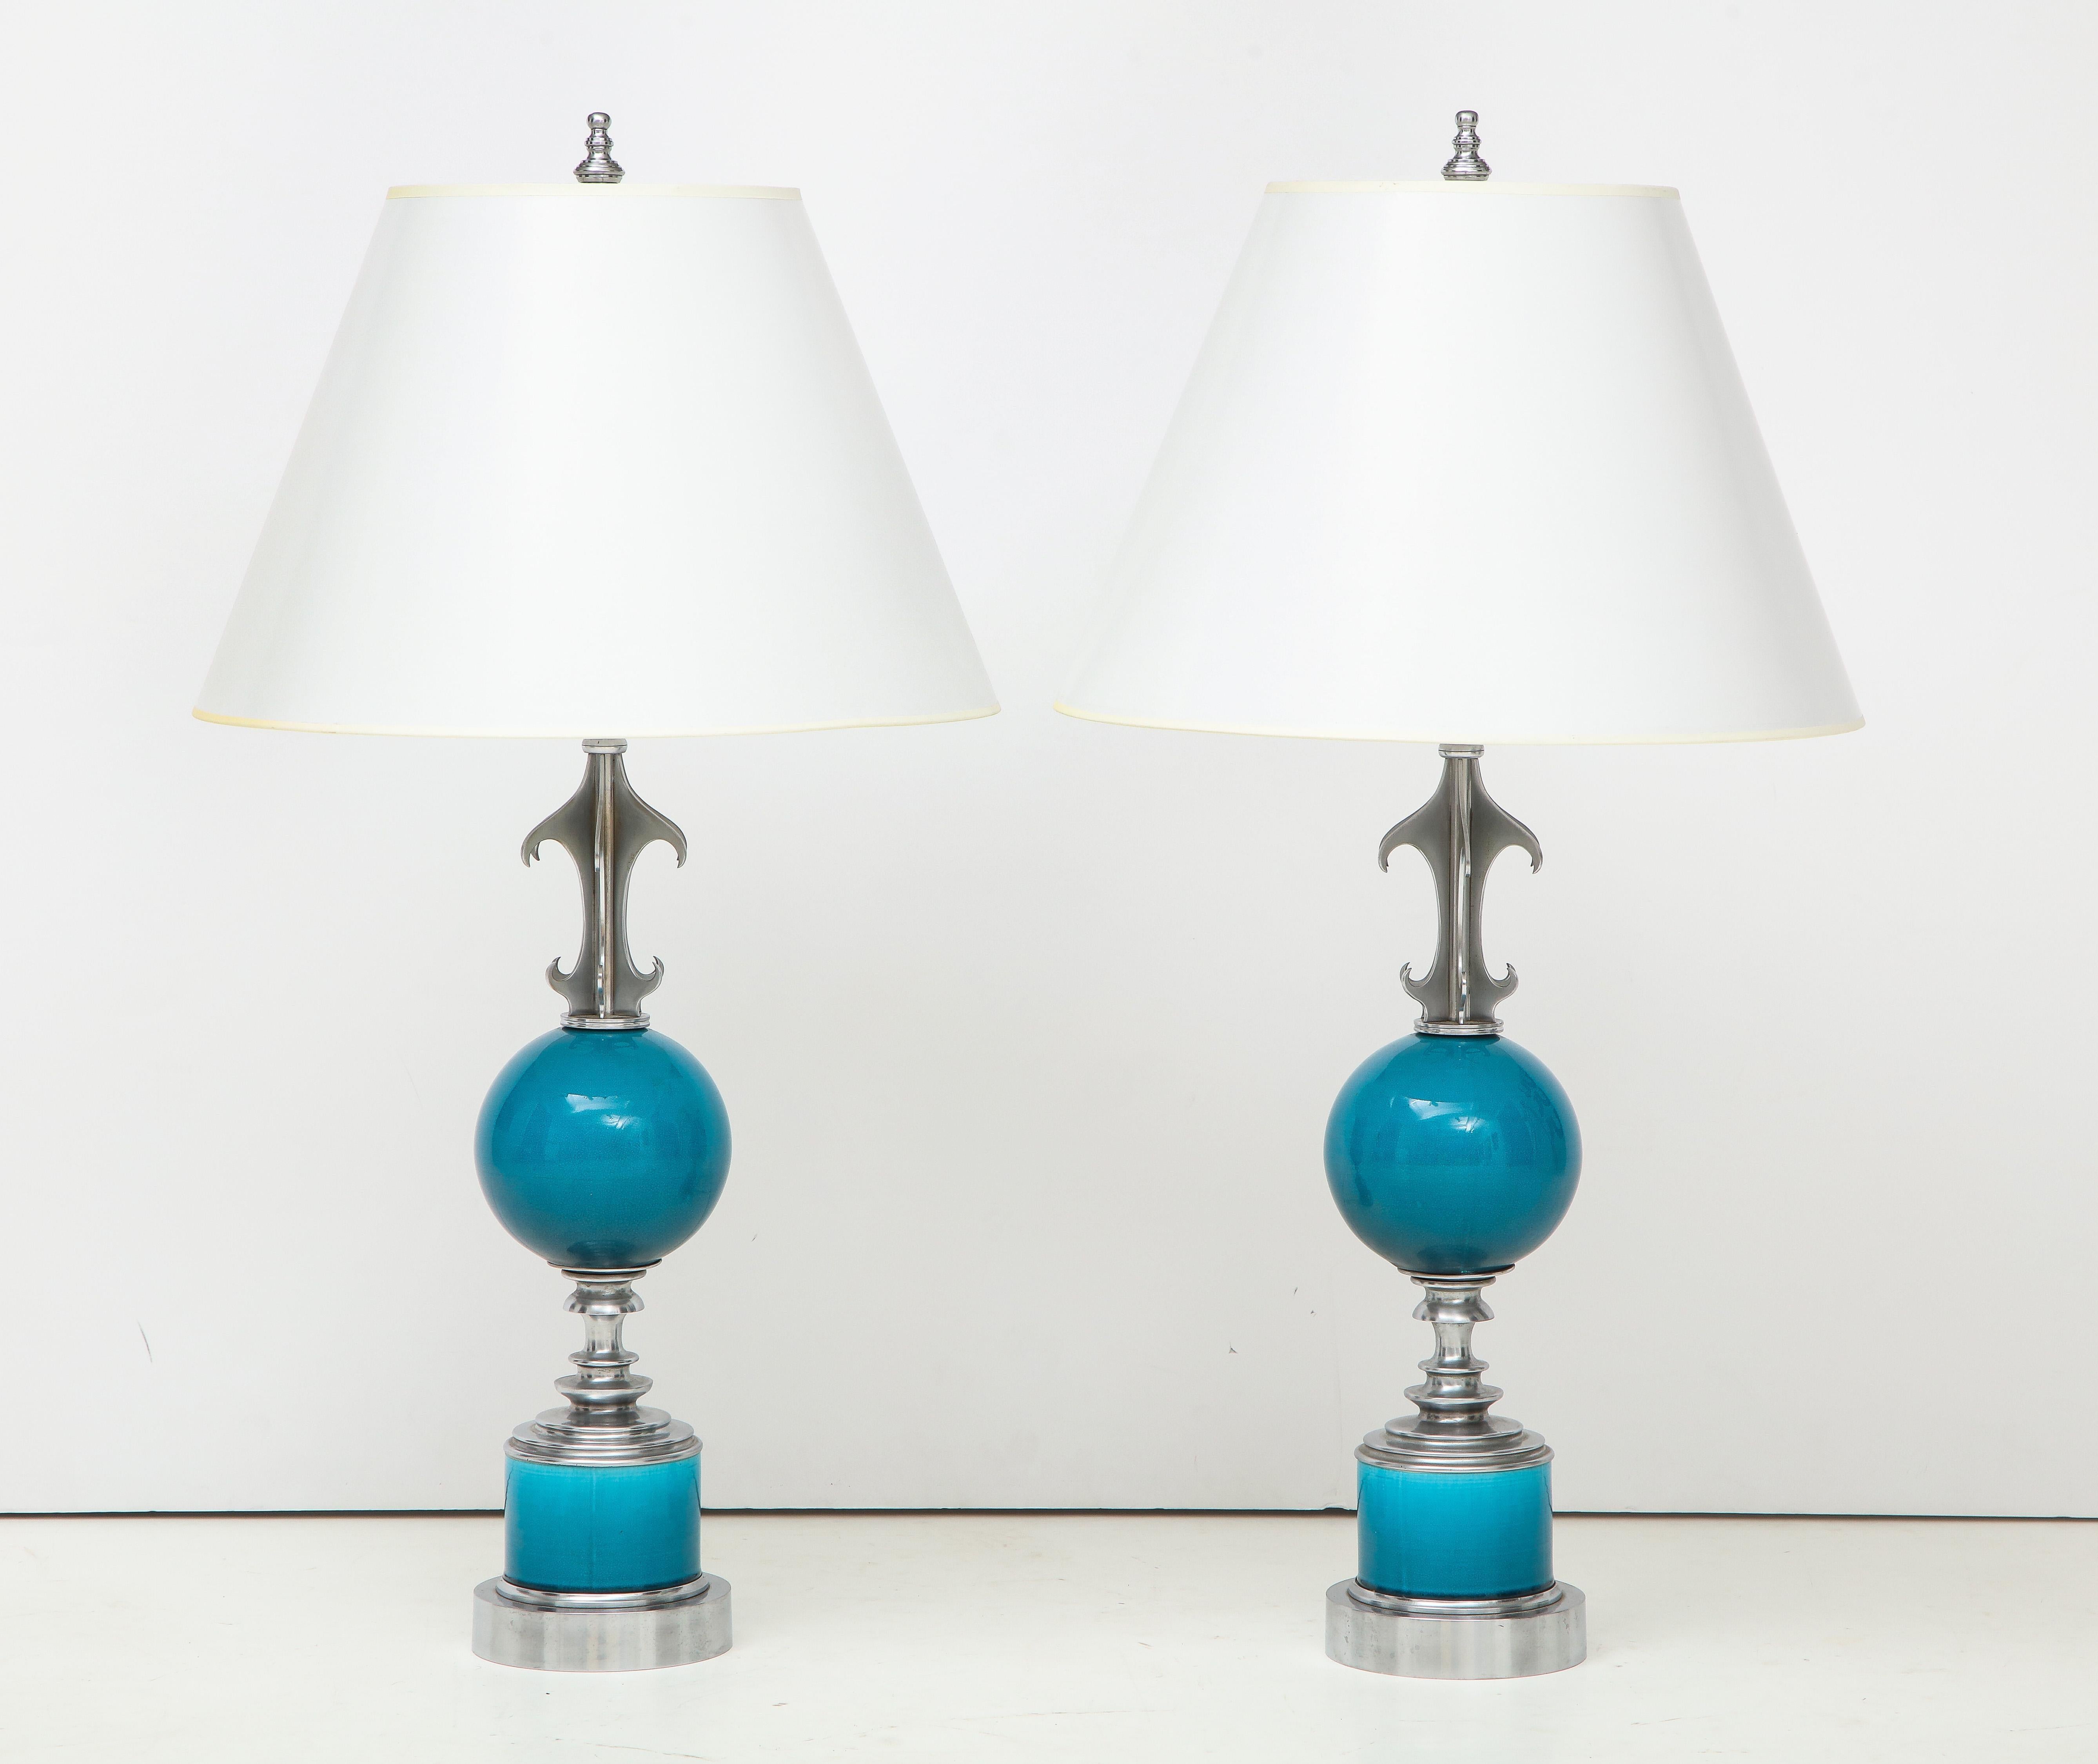 Pair of Blue Ceramic and Nickel-Plated Metal Table Lamps For Sale 1